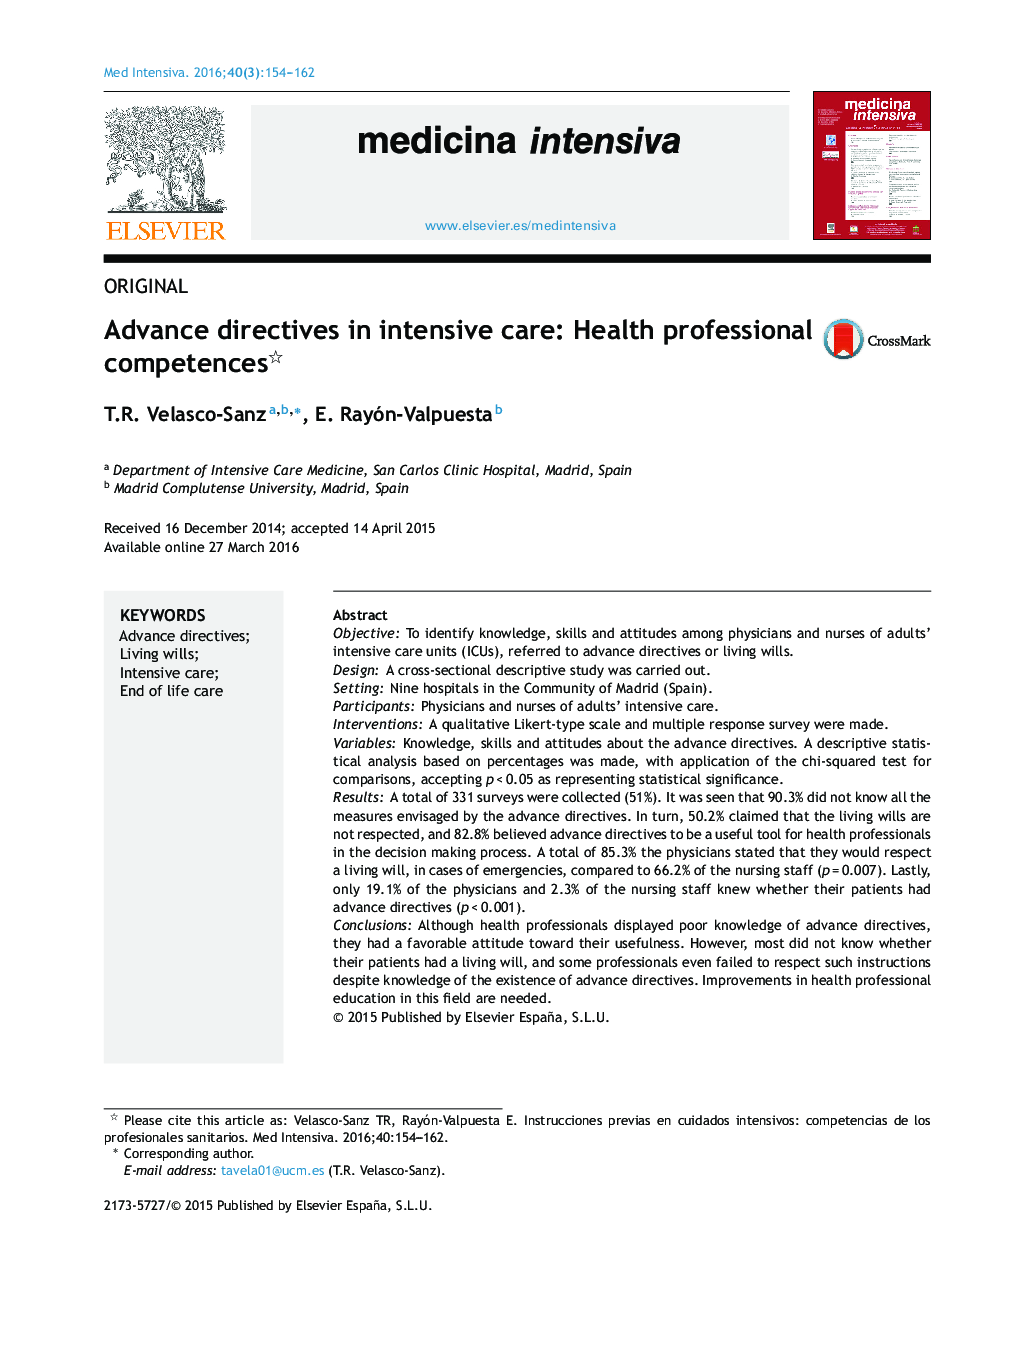 Advance directives in intensive care: Health professional competences 